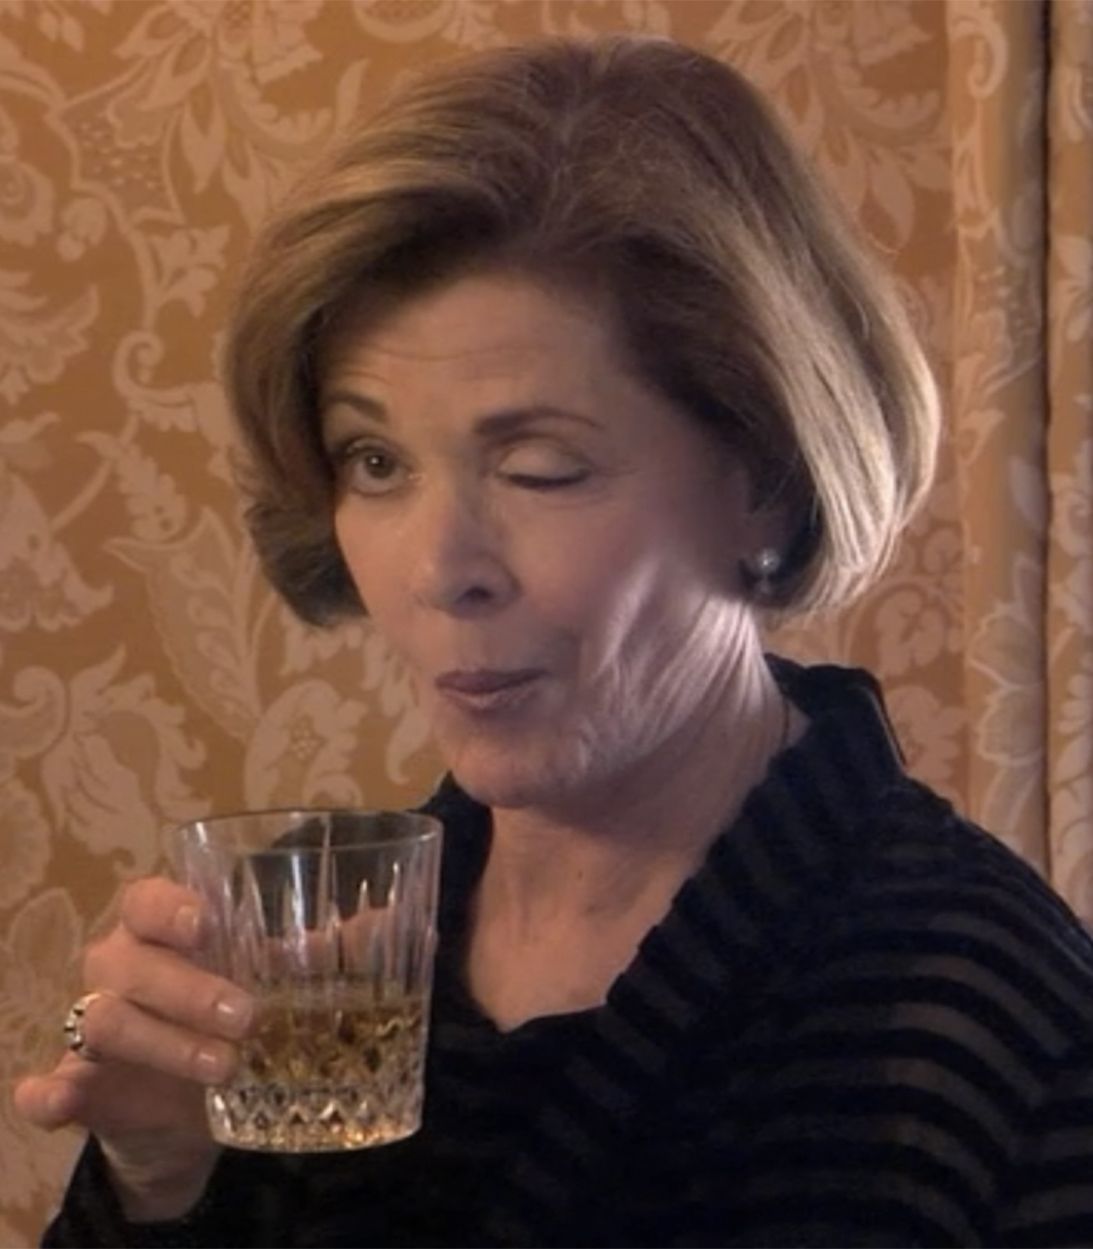 Lucille Bluth tries to wink